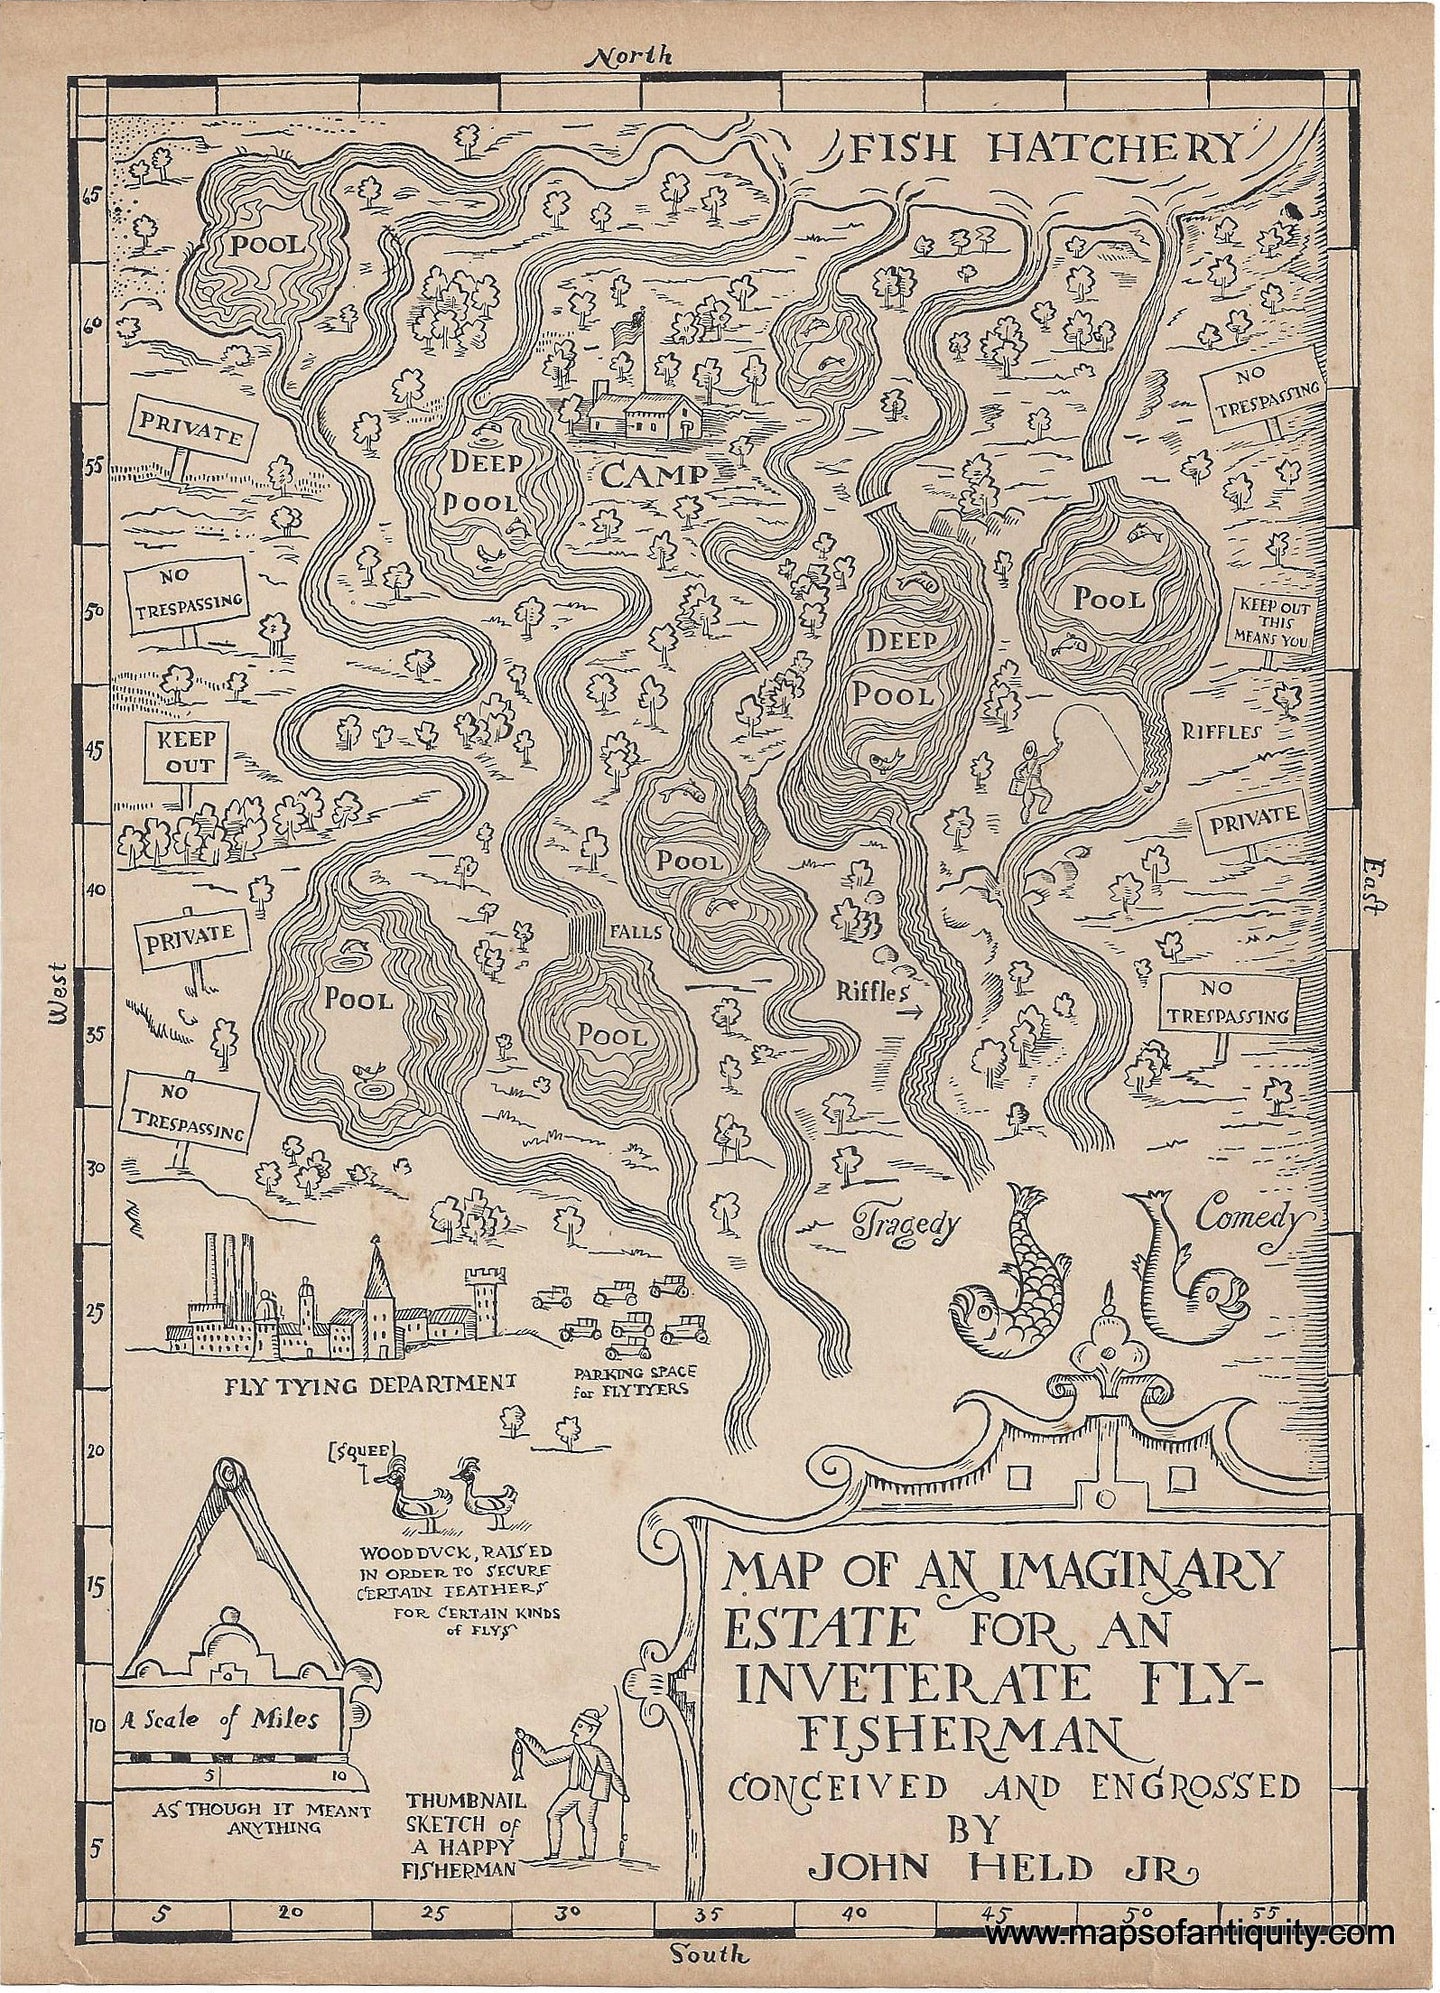 Genuine-Antique-Map-Map-of-an-Imaginary-Estate-for-an-Inveterate-Fly-Fisherman-1920s-John-Held-Jr--Maps-Of-Antiquity